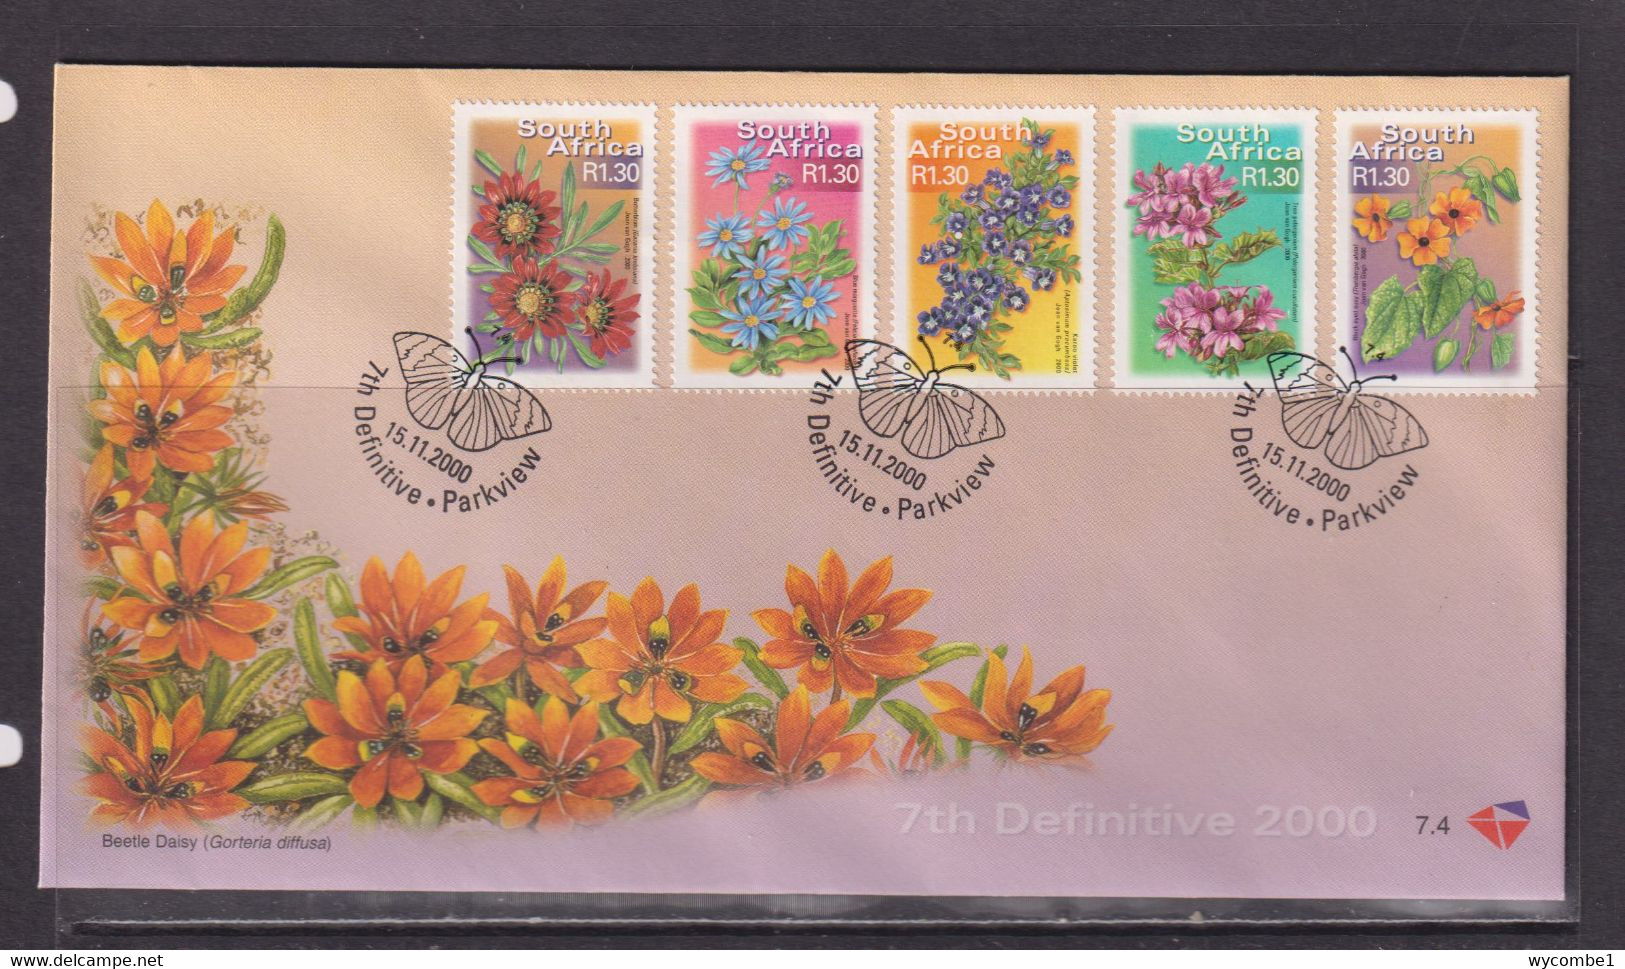 SOUTH AFRICA - 2000 Flowers 1r30 Definitive FDC - Lettres & Documents